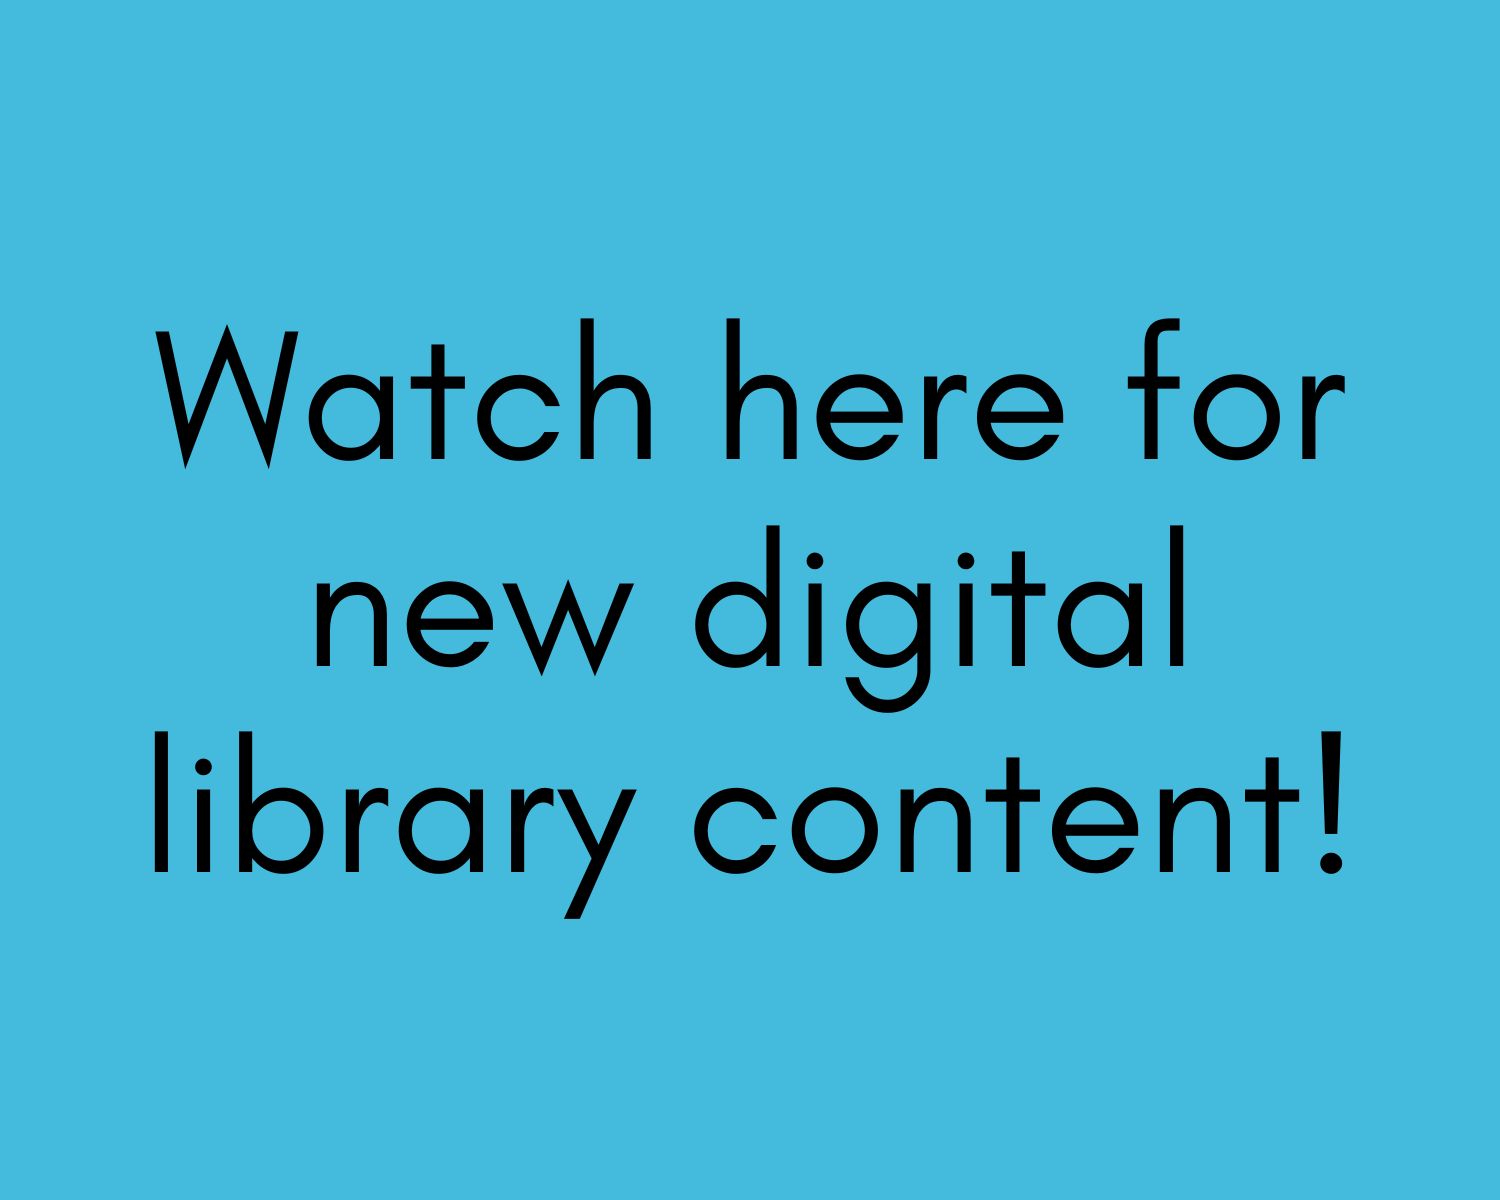 A graphic with a blue background and the text "Watch here for new digital library content!"